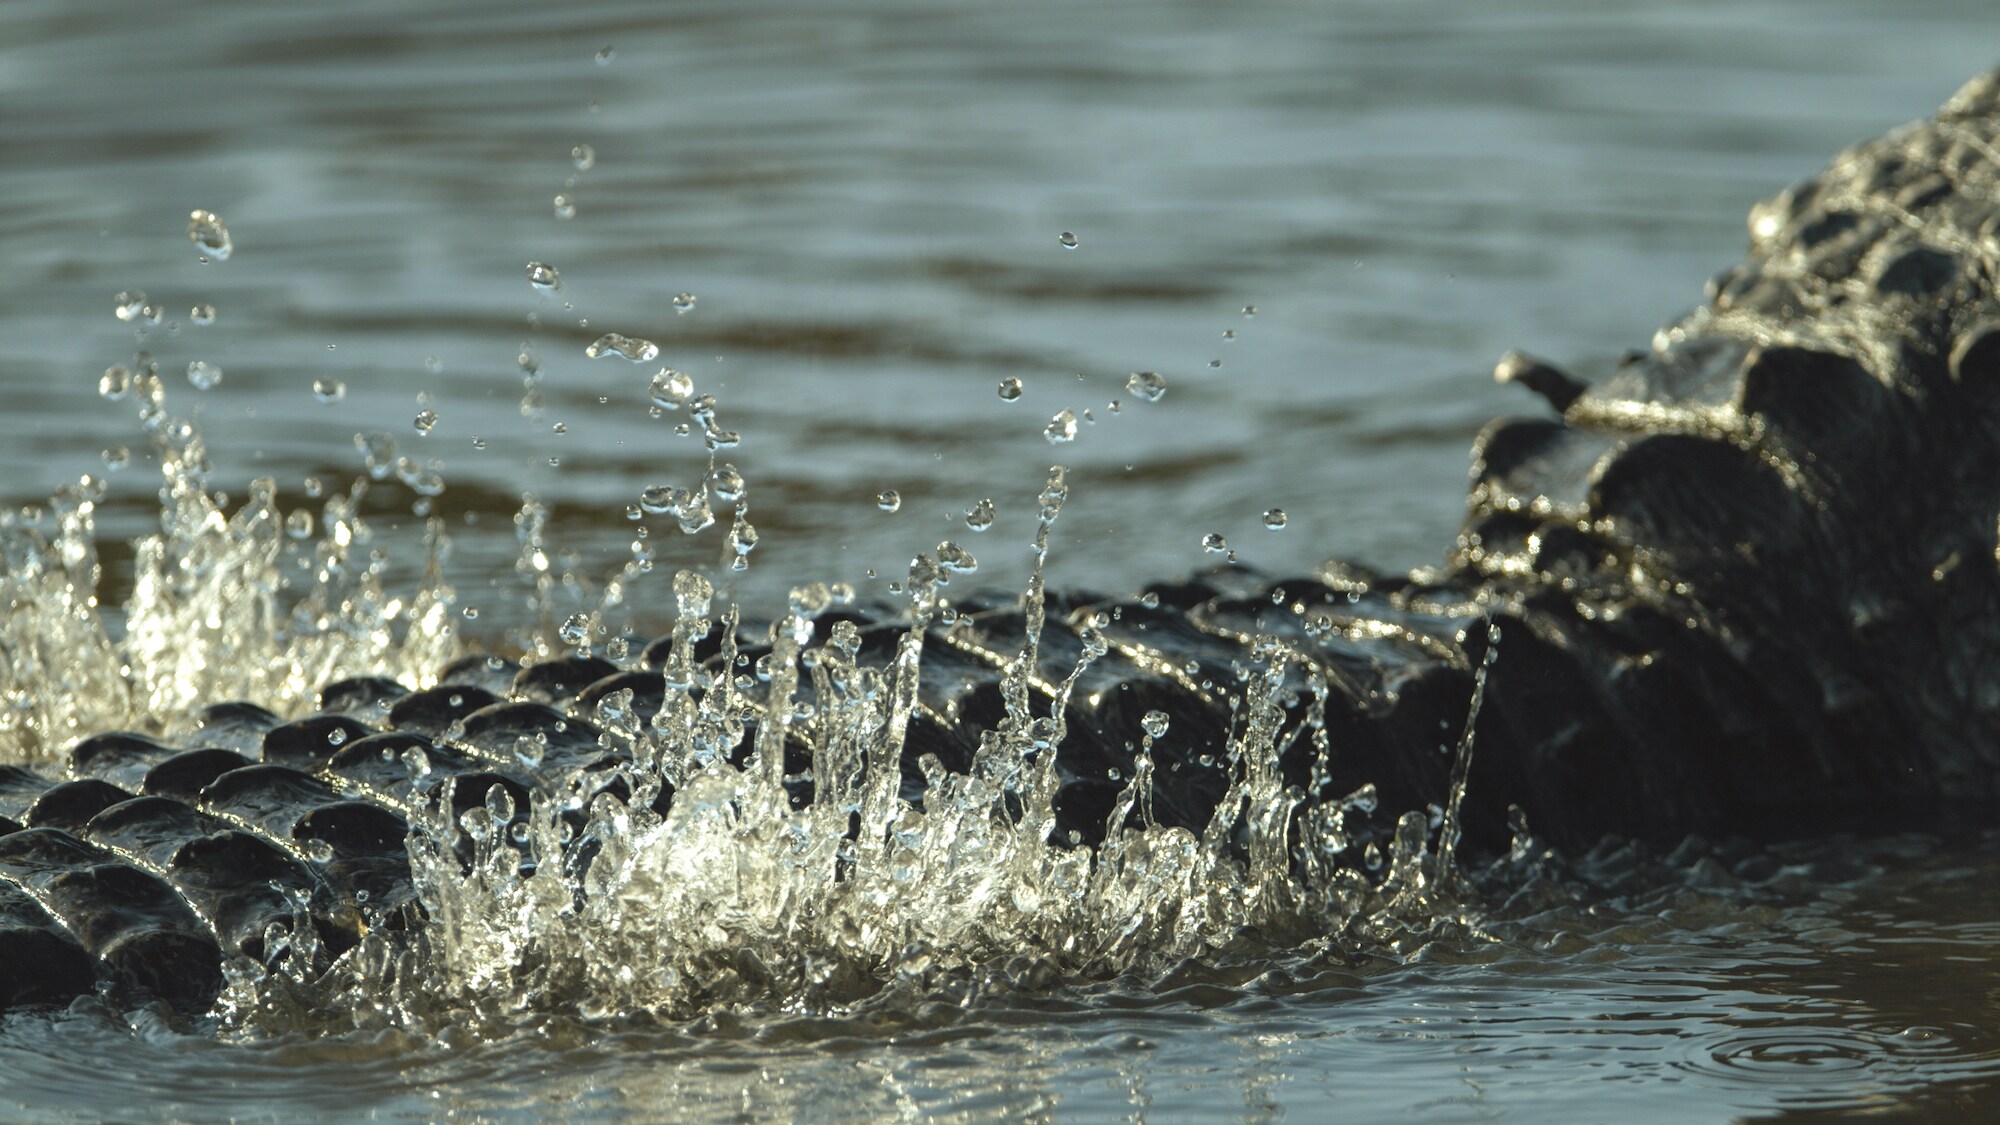 An alligator performs a water dance. (National Geographic for Disney+)